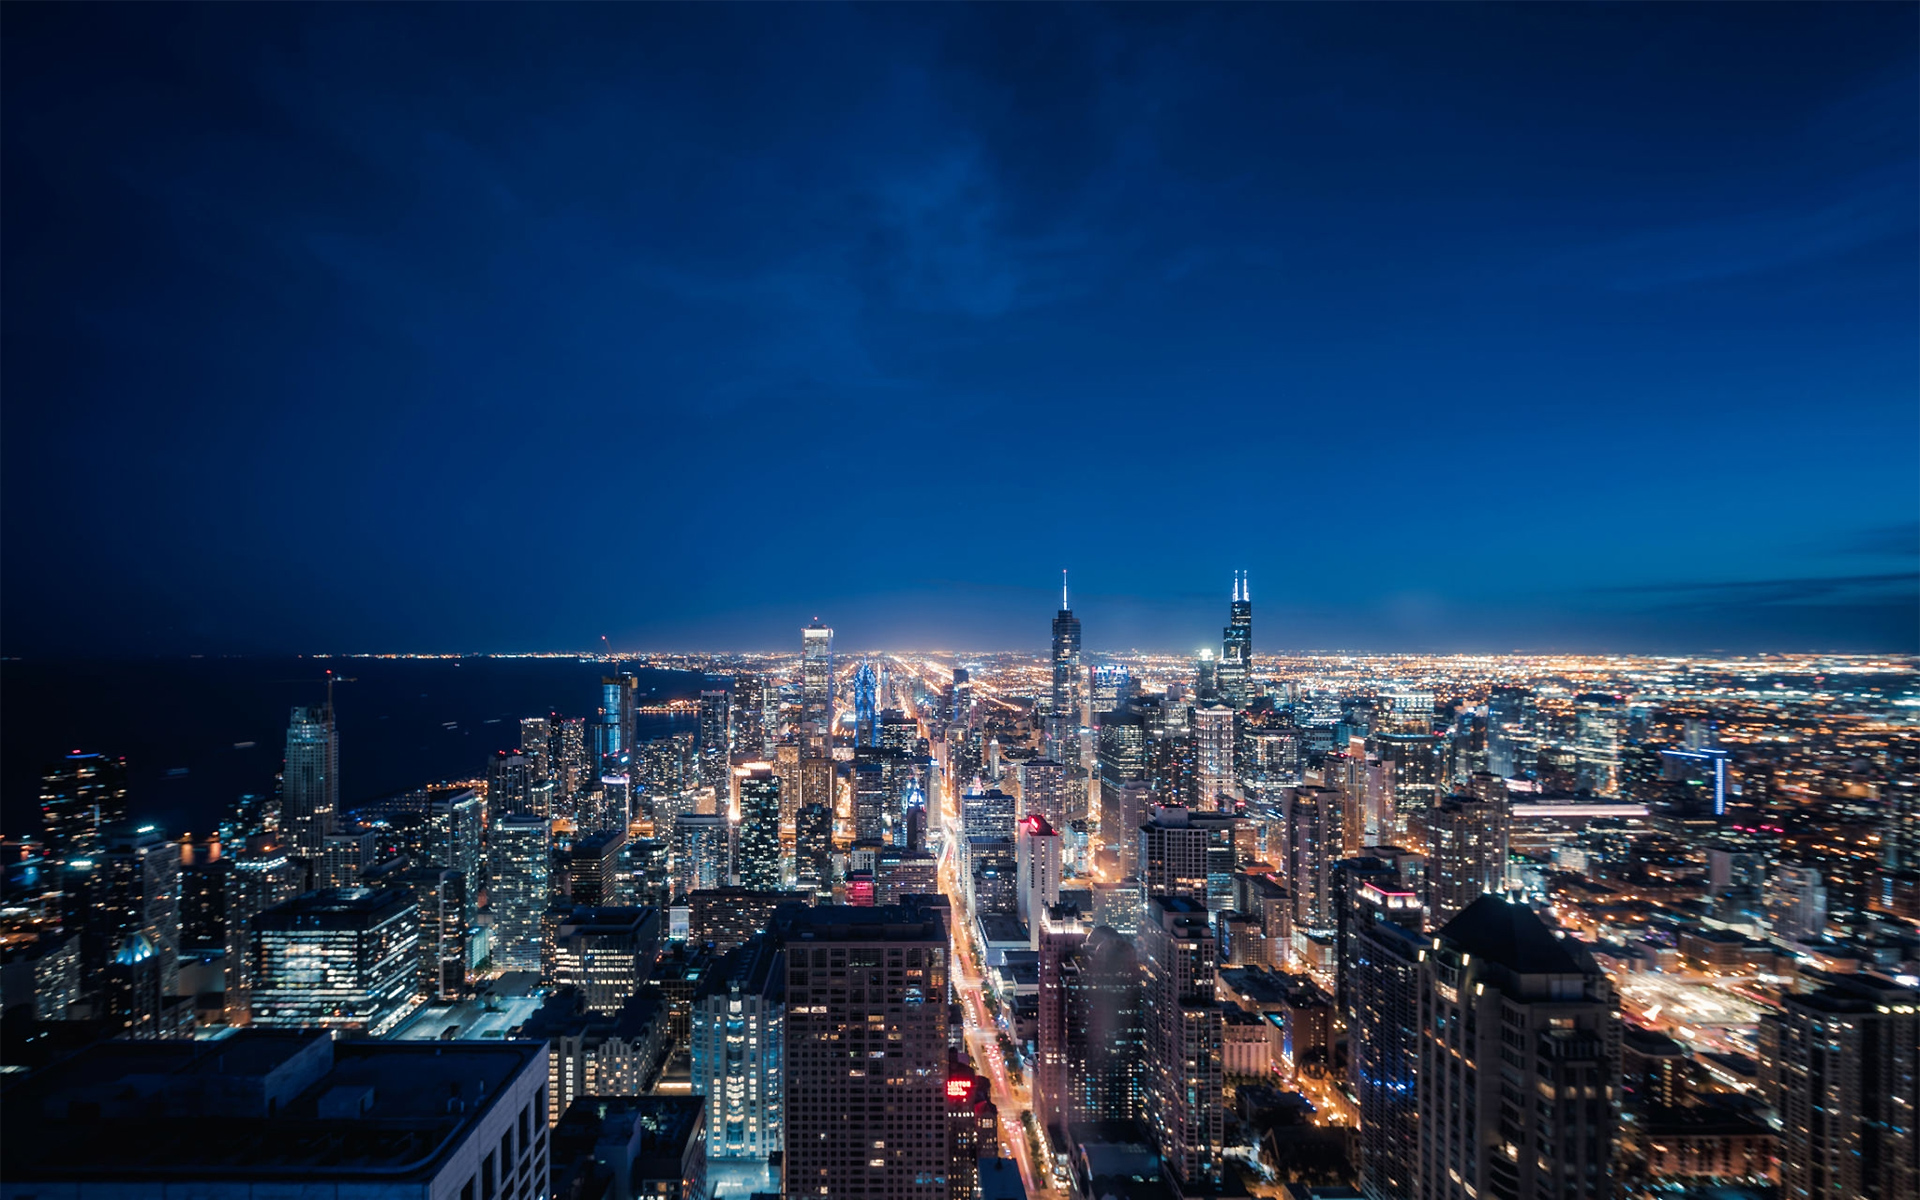 https://madridexpats.com/wp-content/uploads/2021/01/1160442138-Aerial-View-of-Chicago-cityscape-skyline-at-Night.jpg